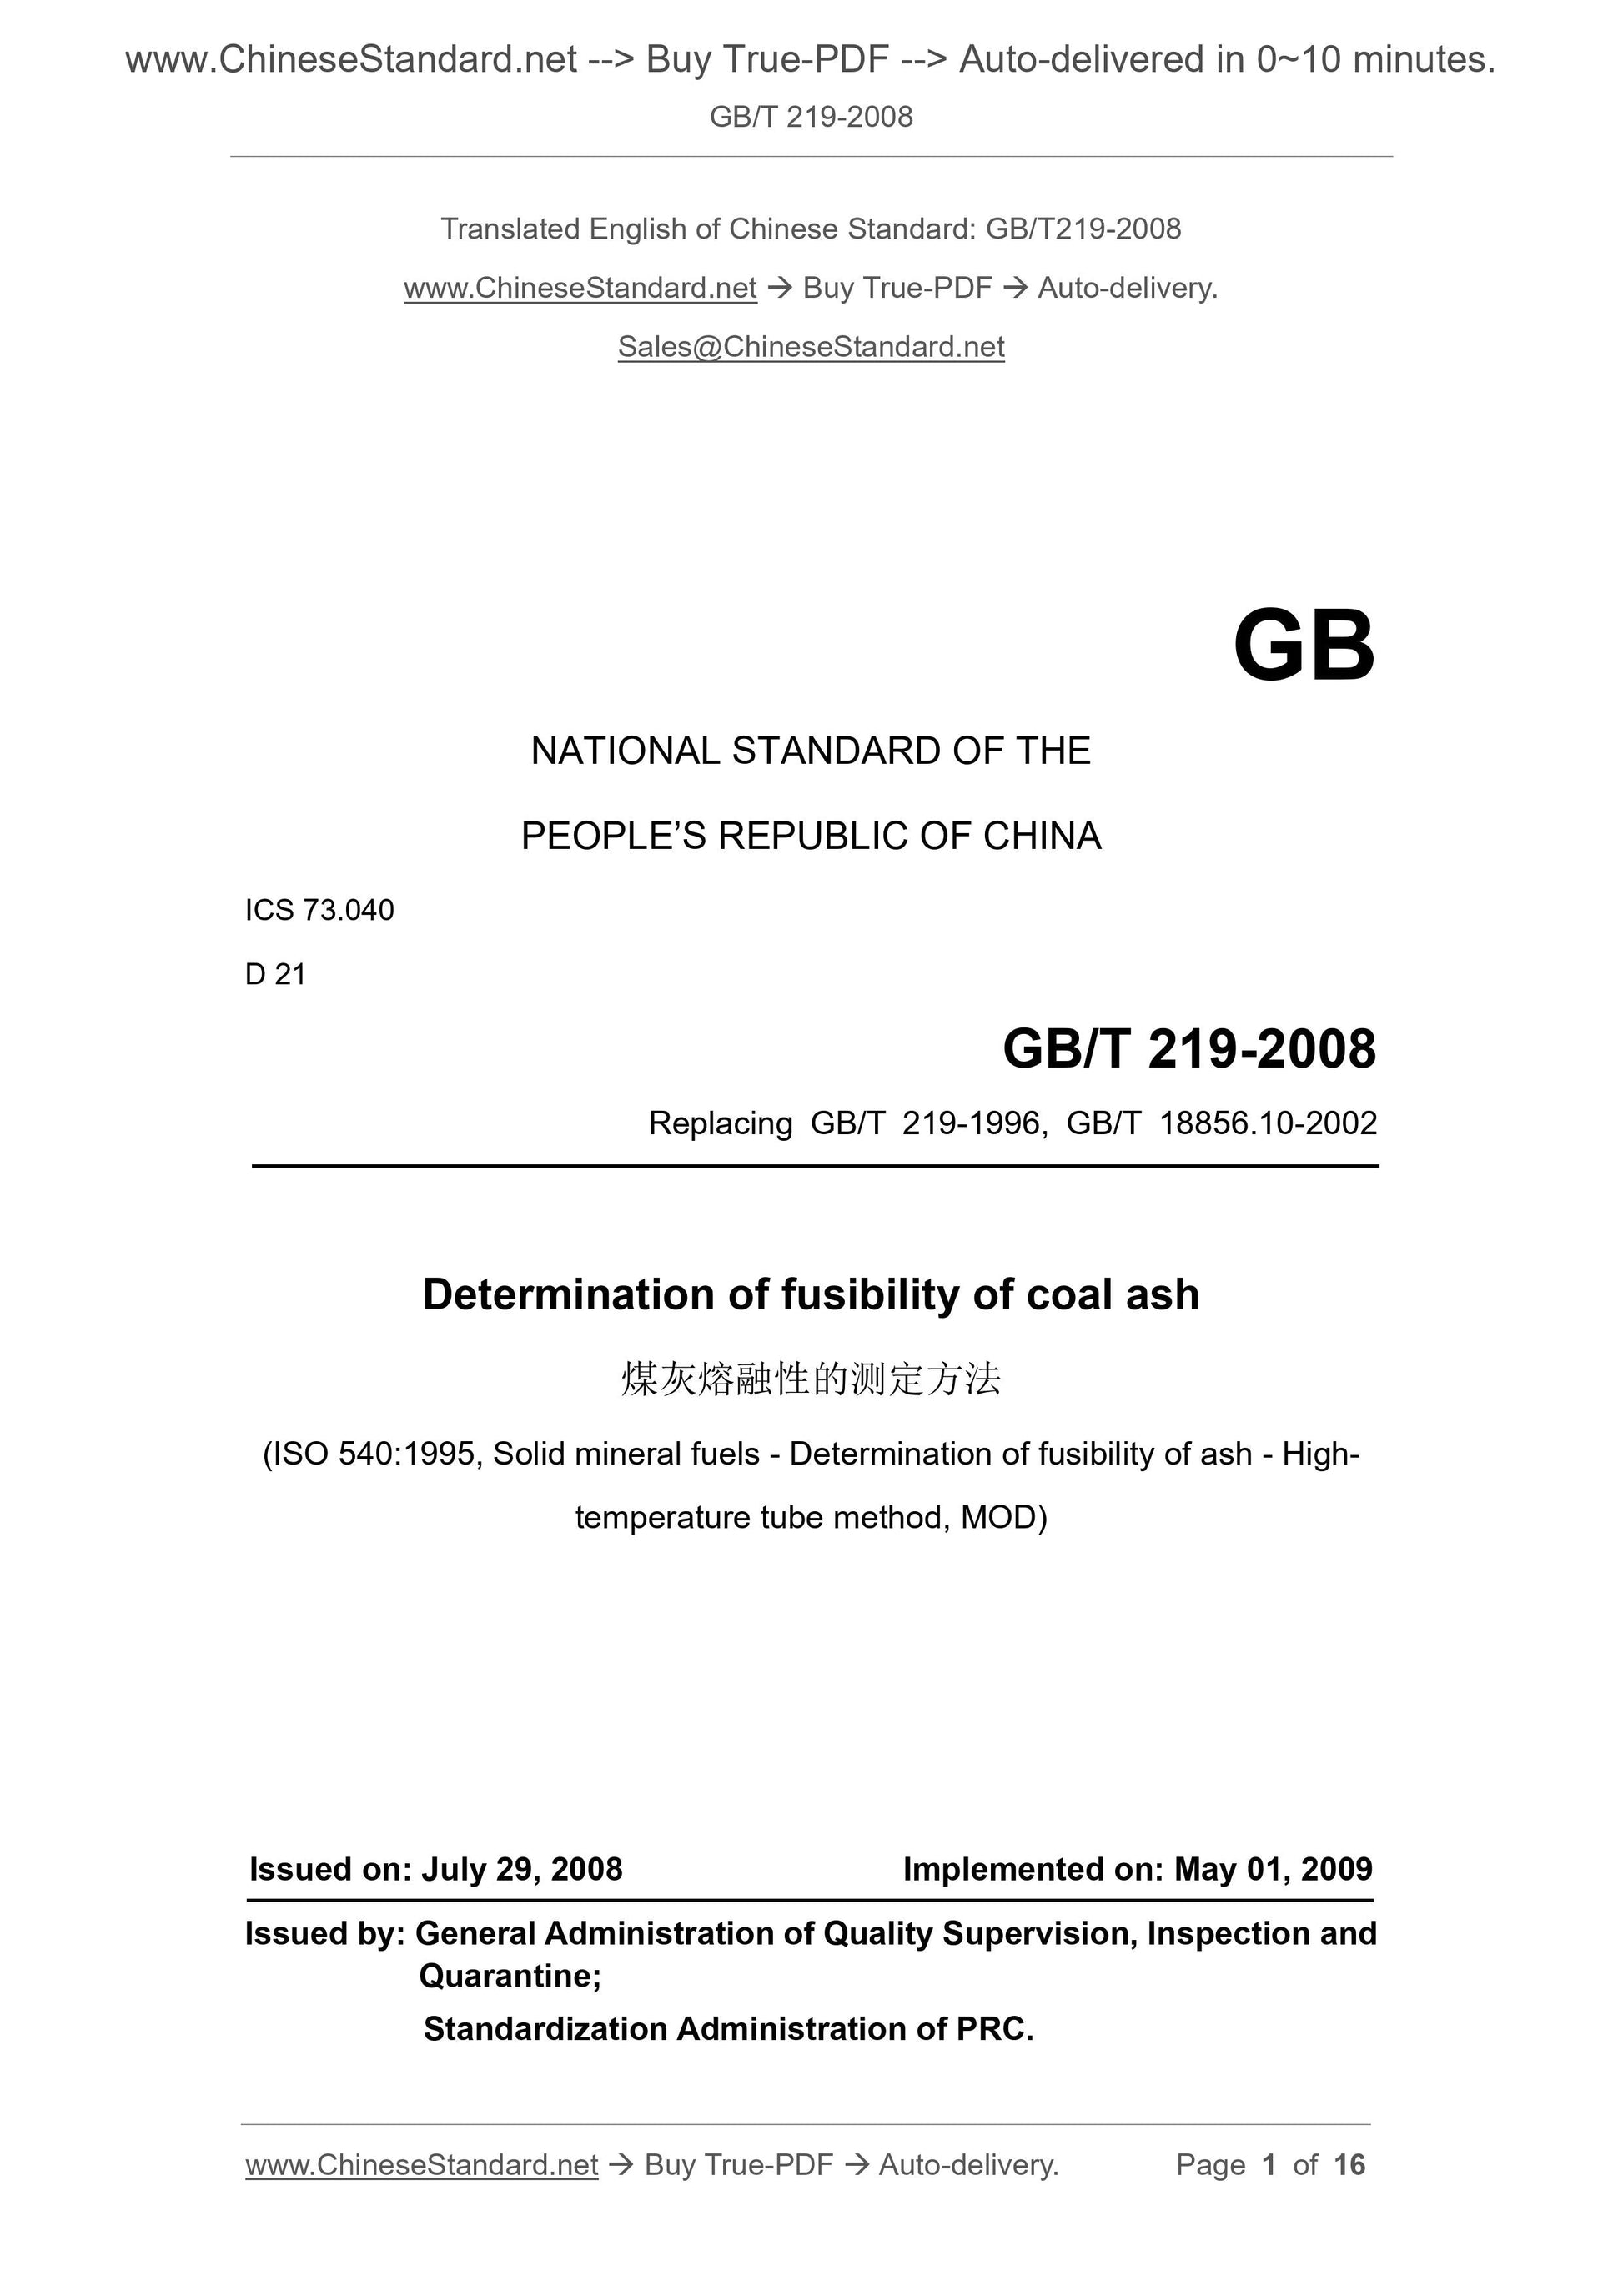 GB/T 219-2008 Page 1